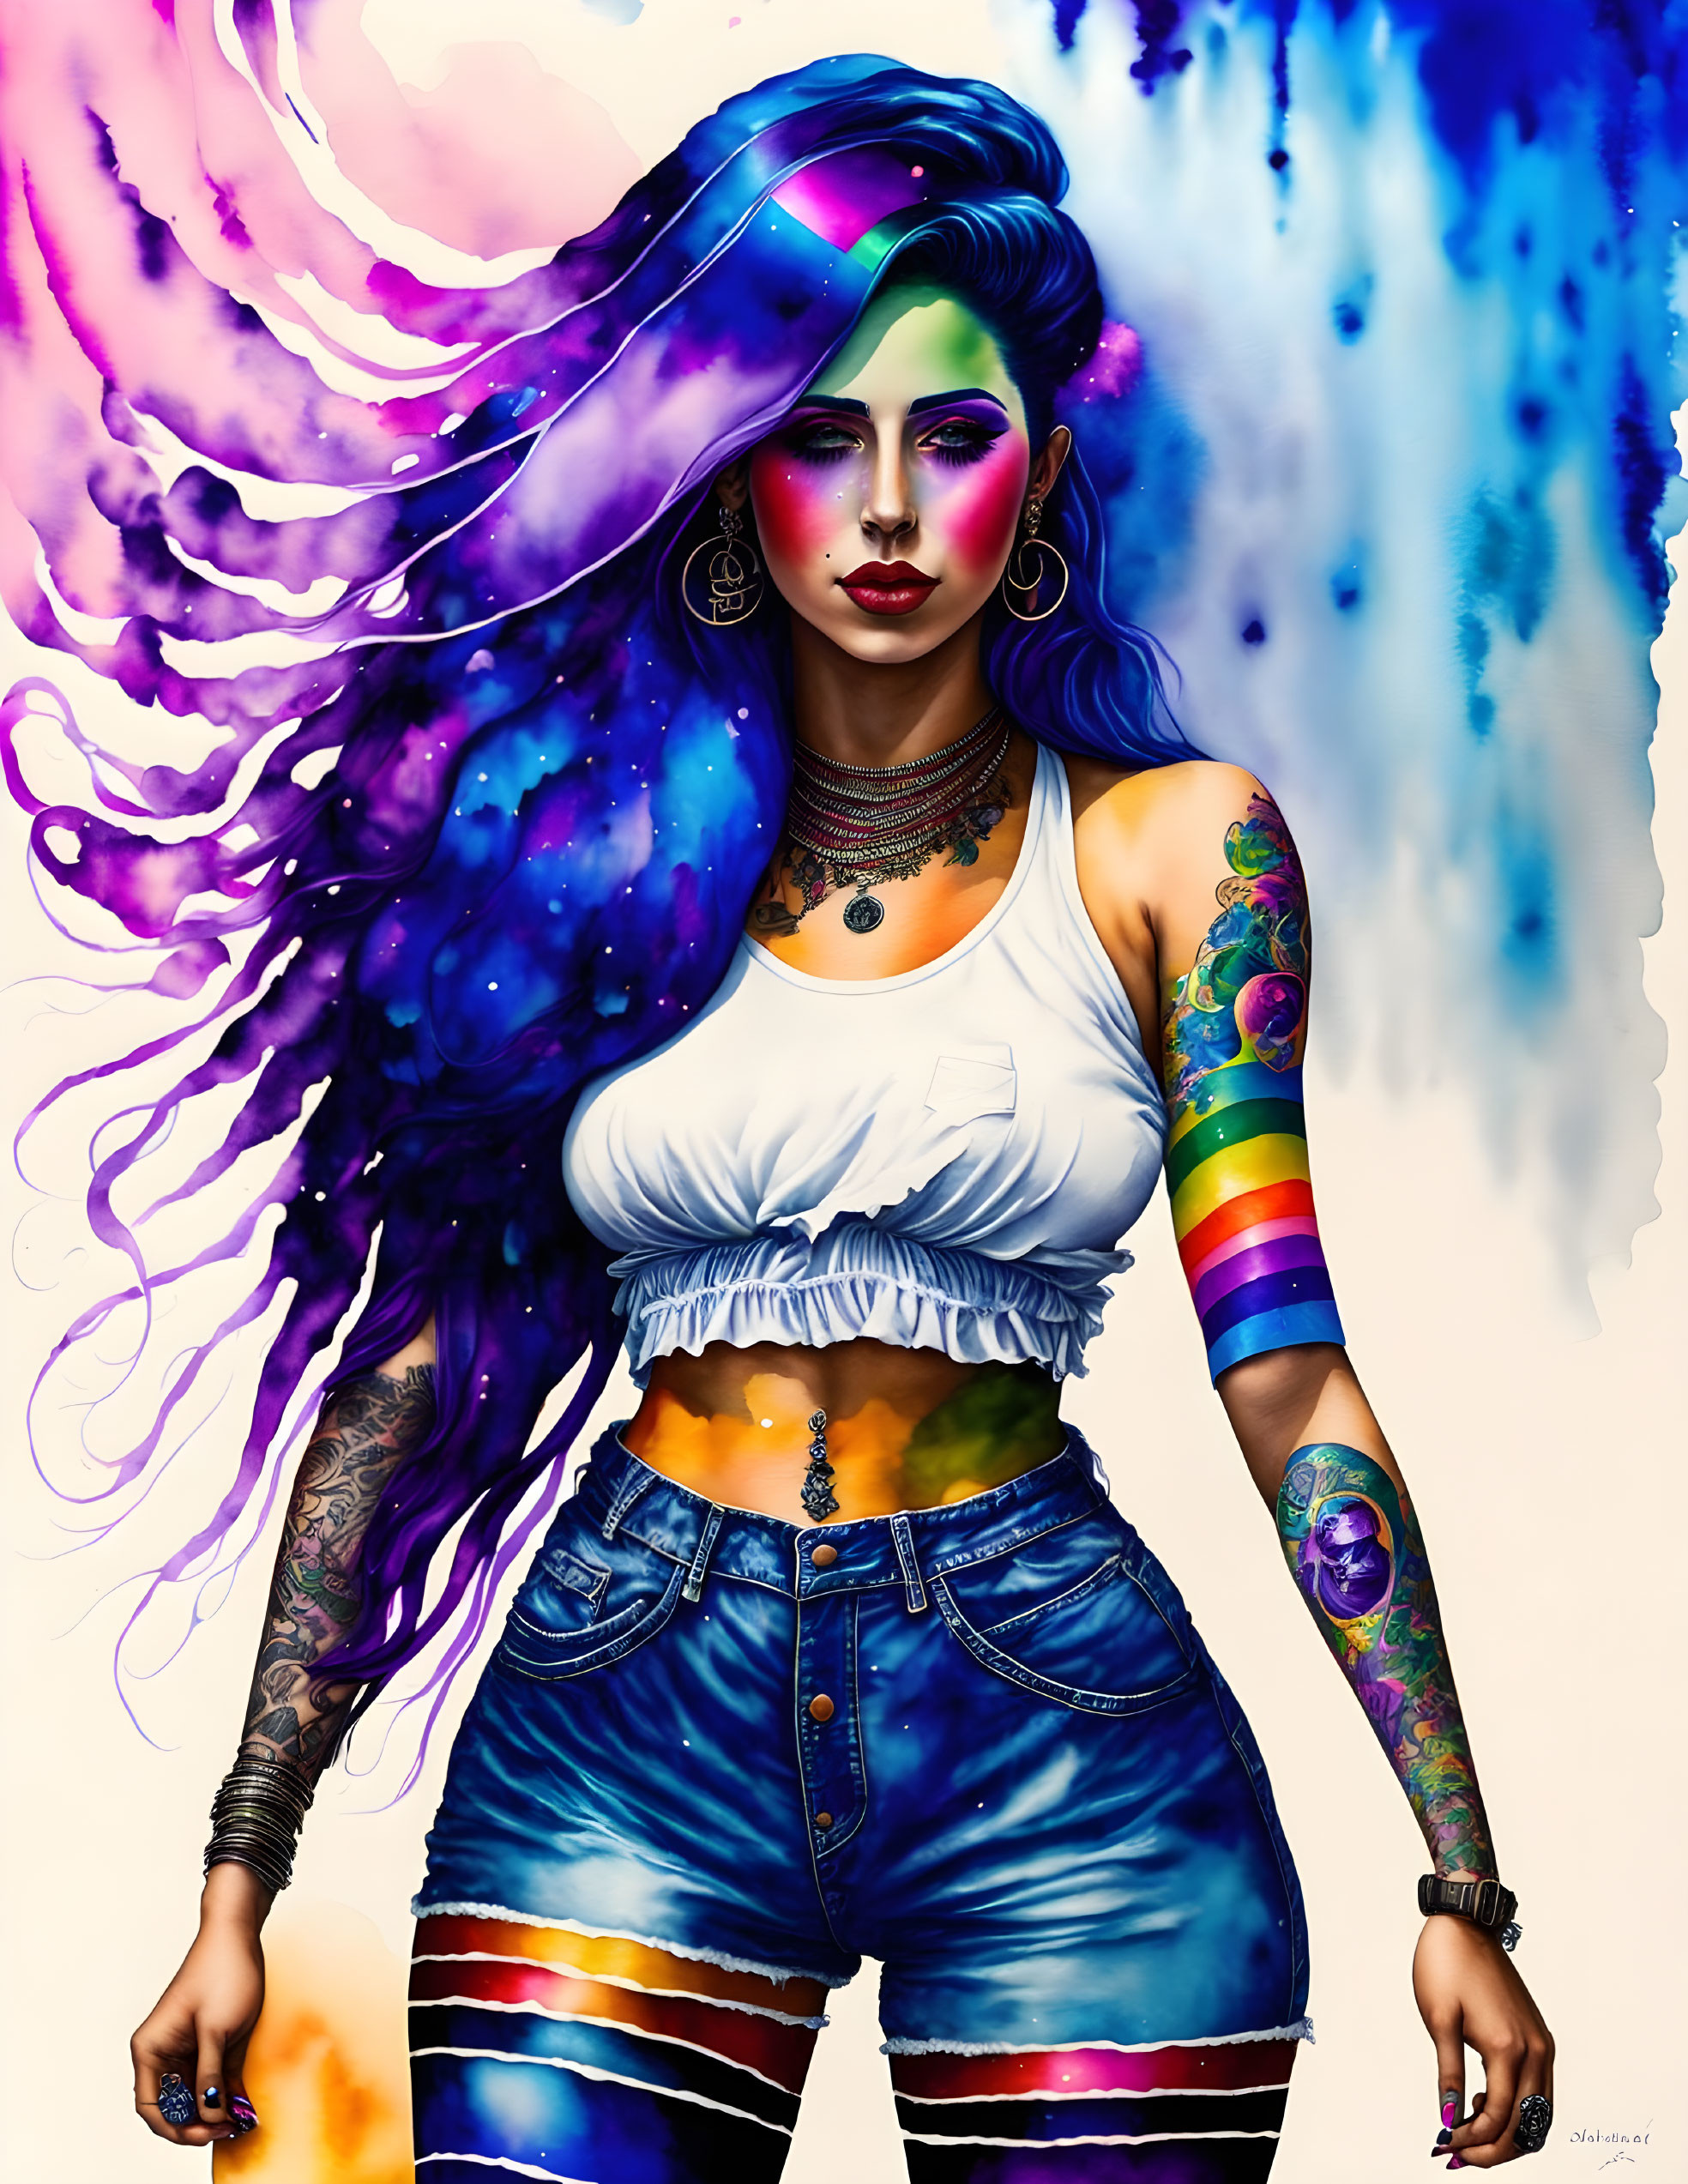 Colorful digital artwork: Woman with cosmic hair, tattoos, rainbow attire on white background